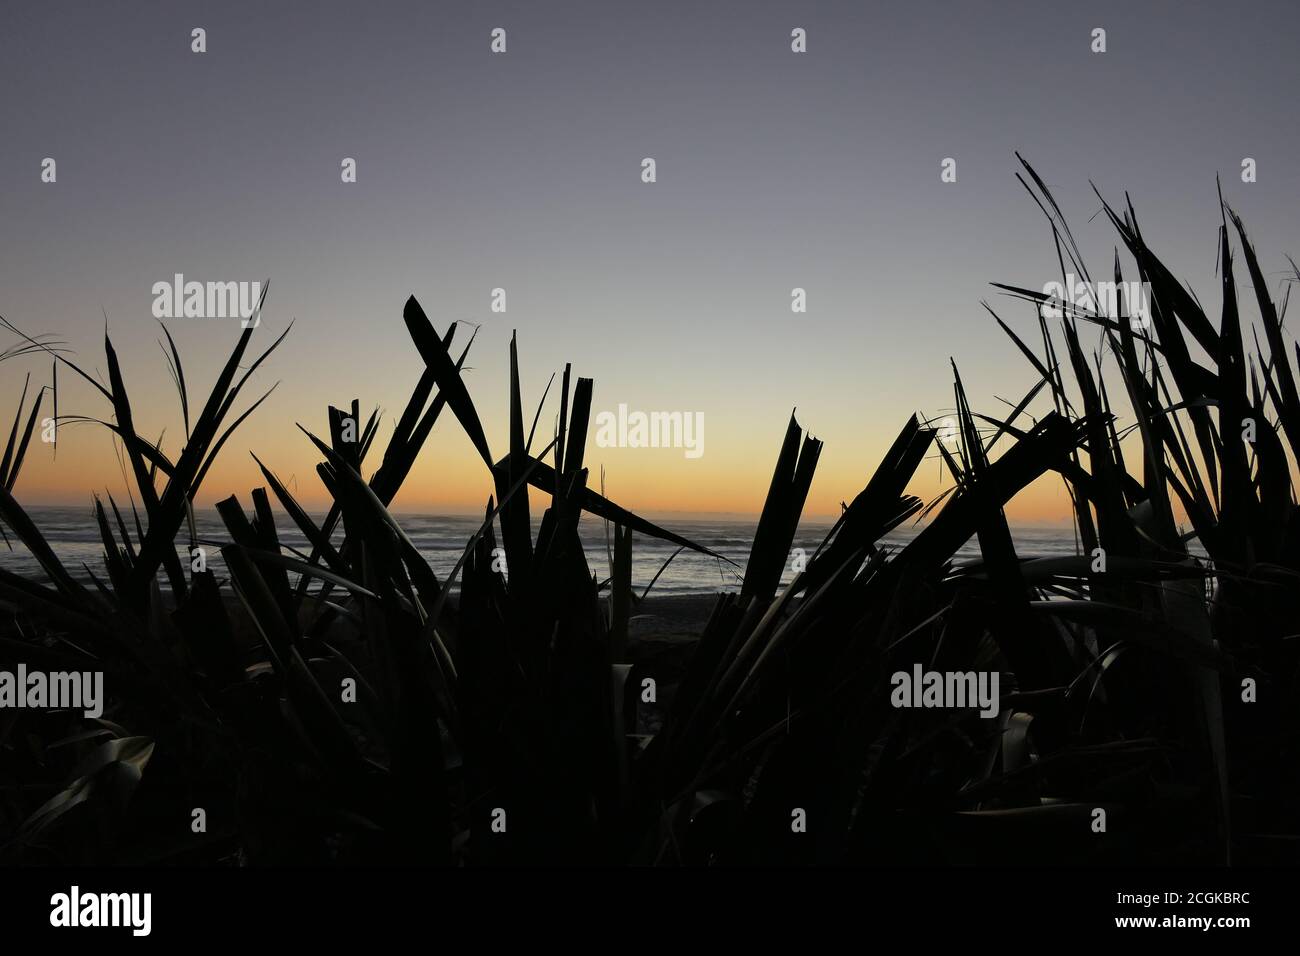 Silhouette of reeds with the sea in the background at dusk Stock Photo